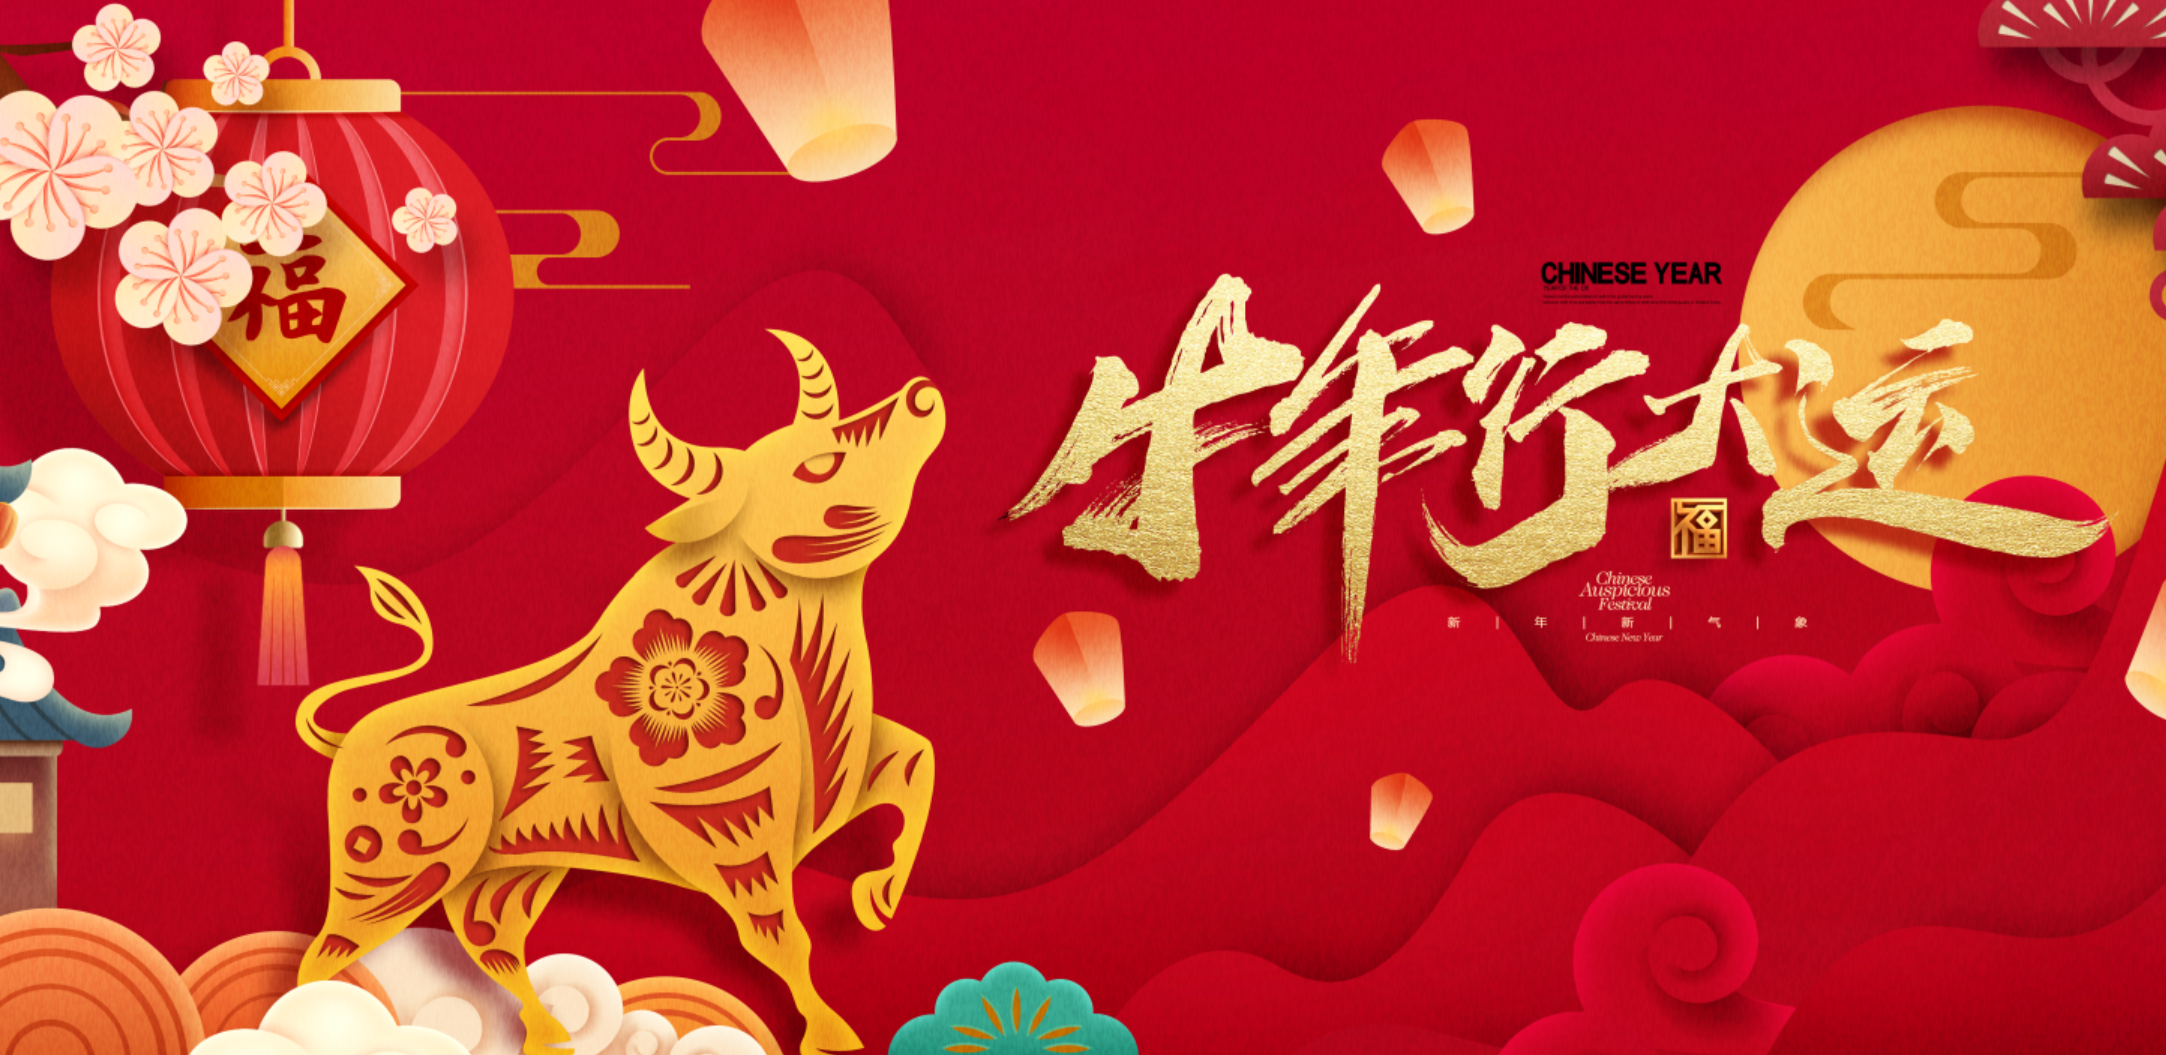 Happy Chinese New Year - Year of the Ox